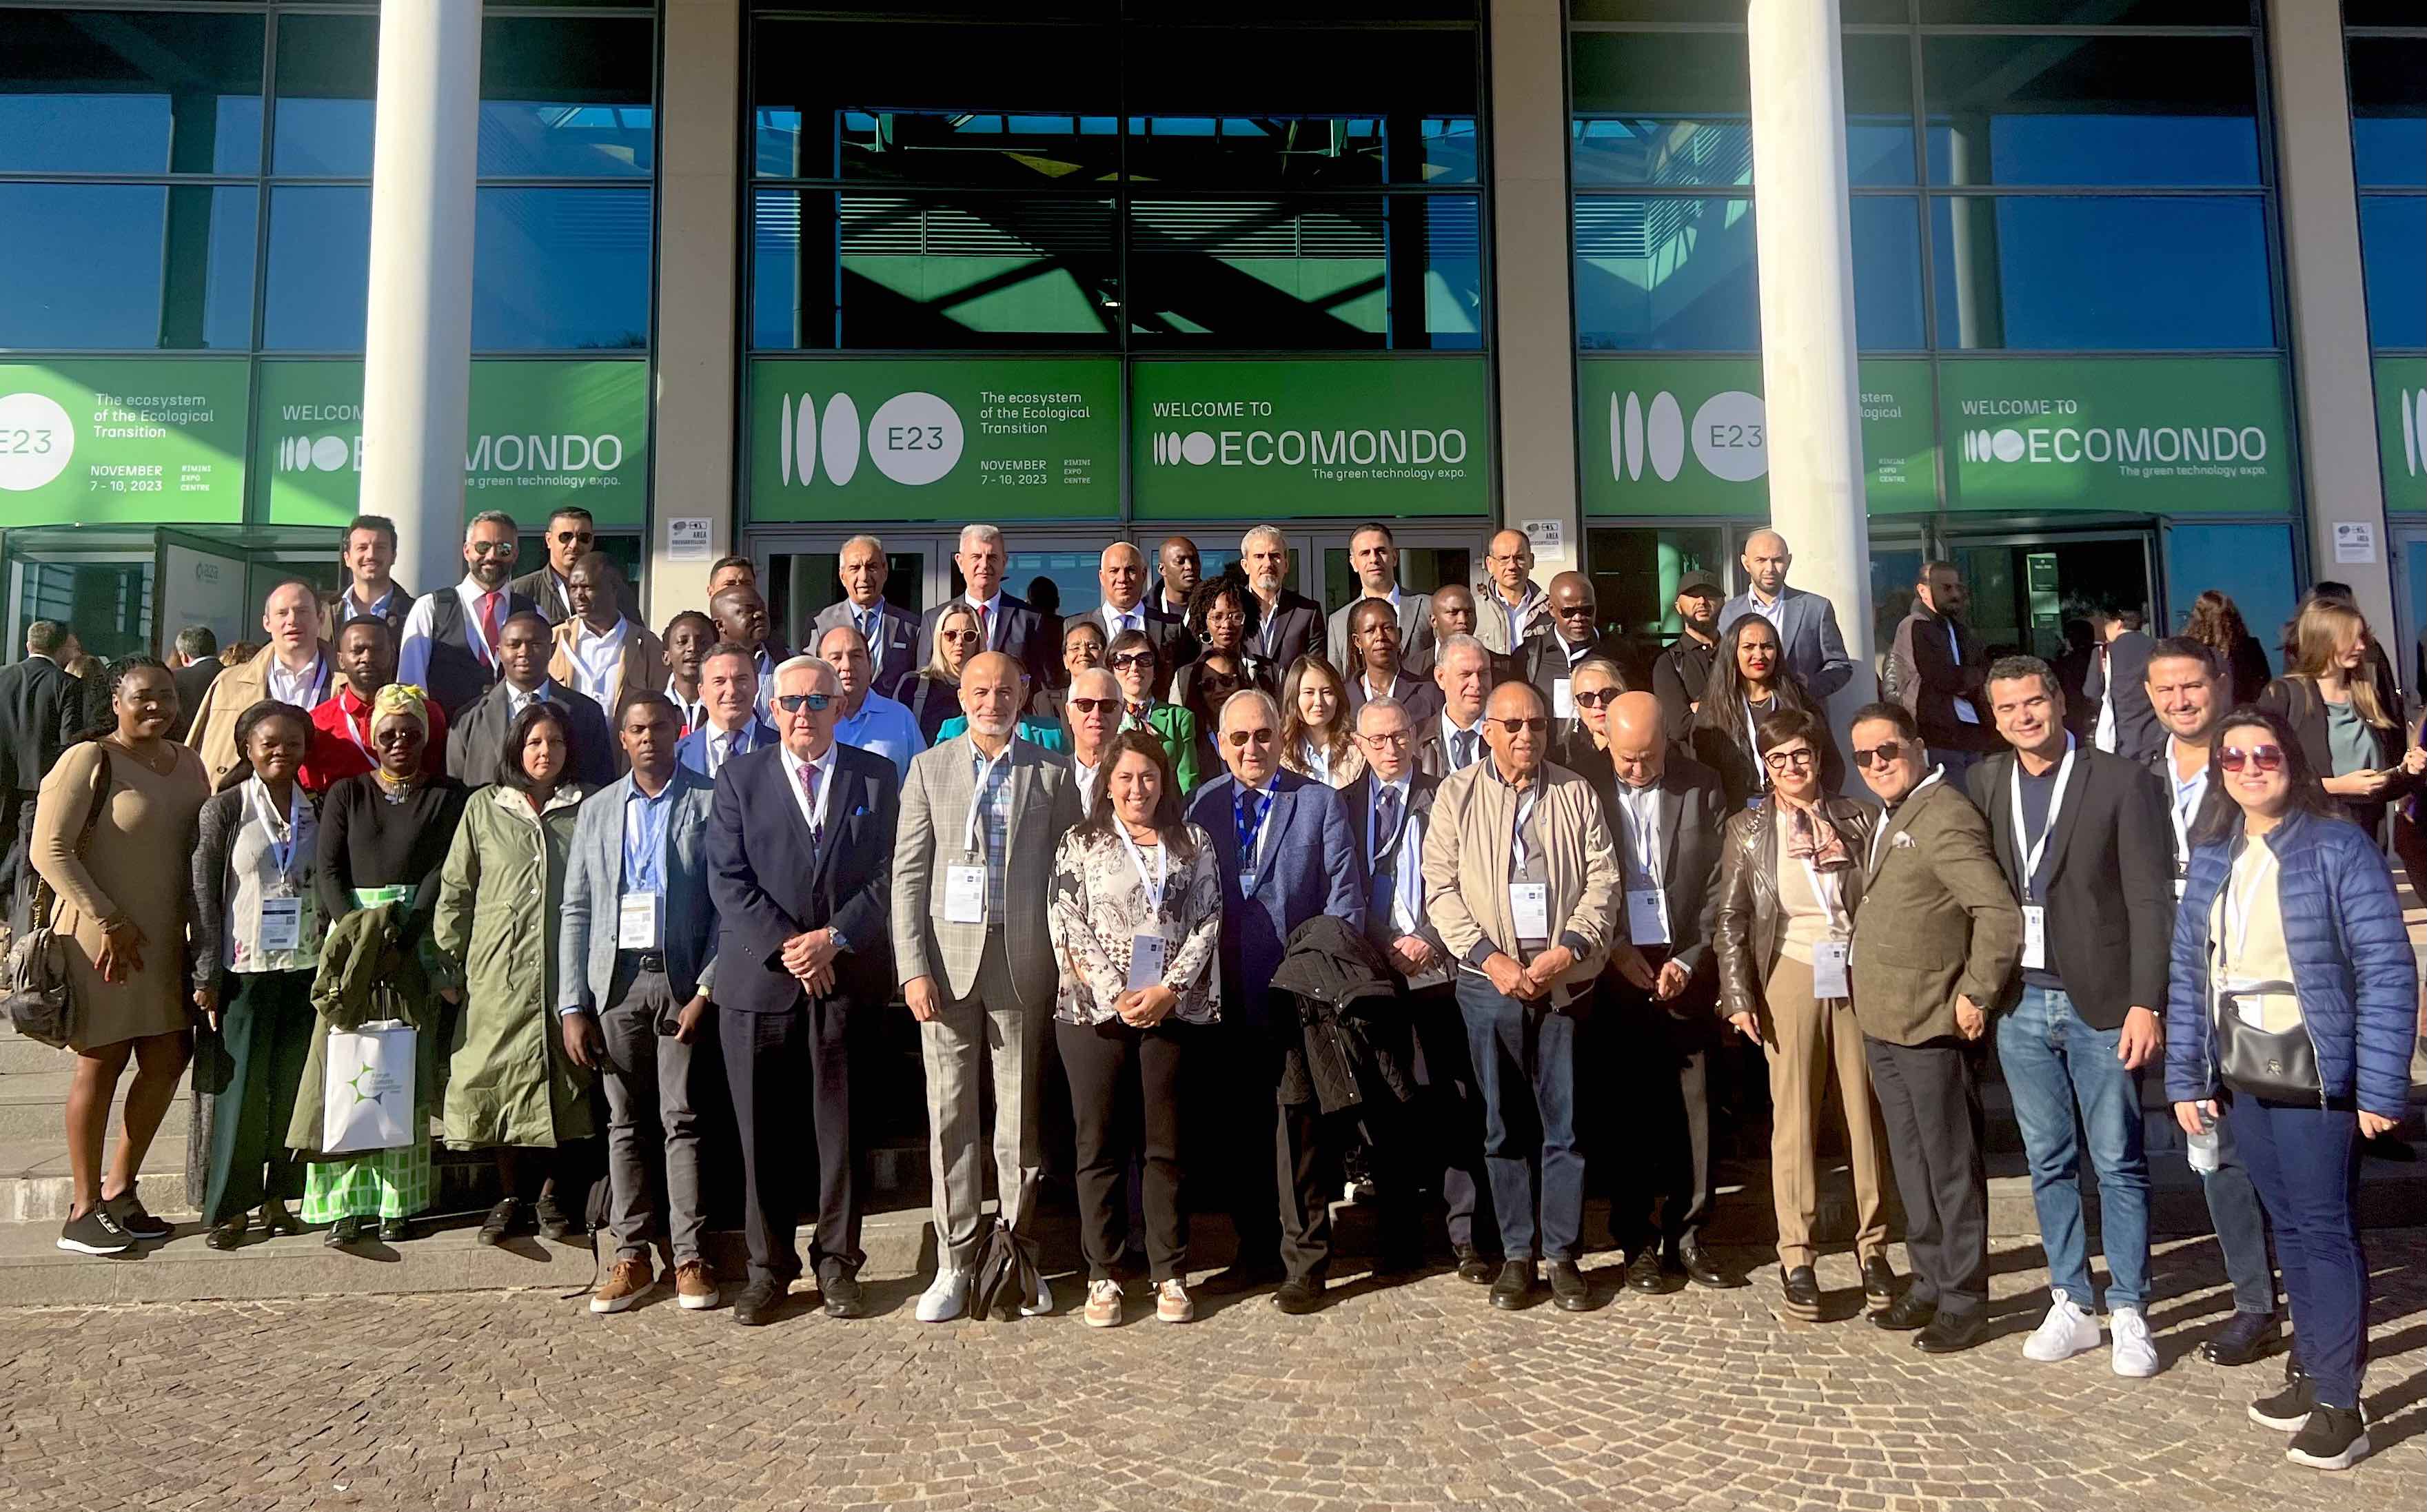 Ecomondo 2023: delegation from 9 partner countries and Investment Forum on Energy & Environment